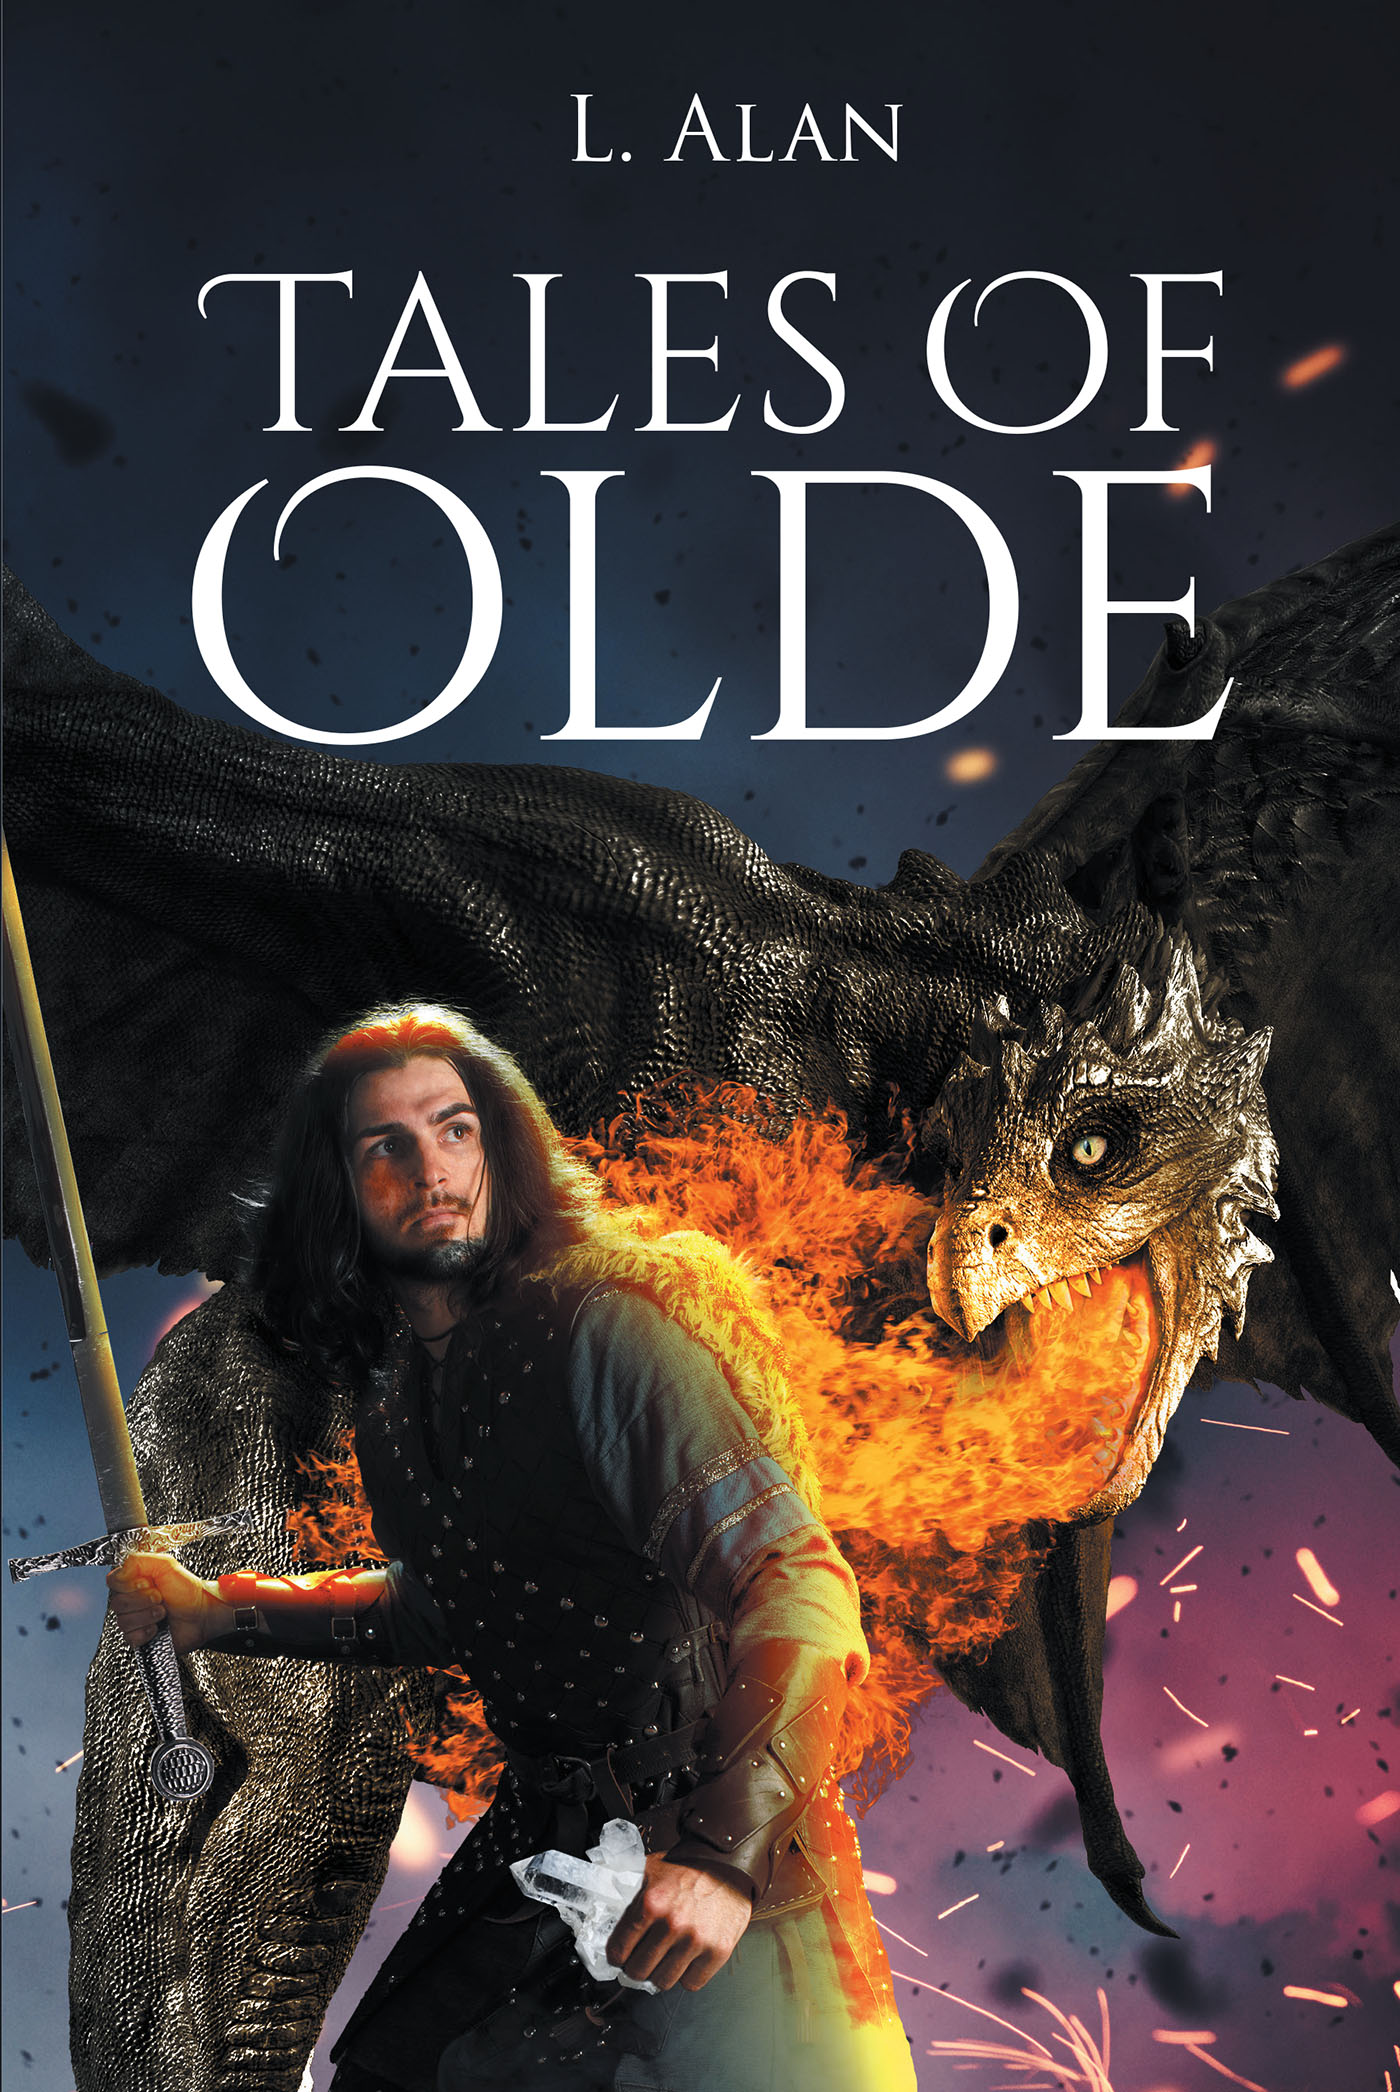 Author L. Alan’s New Book, "Tales of Olde," is a Riveting Story Set in a World of Magic in Which Humans and Dragons Must Form an Alliance Before Their World is Destroyed